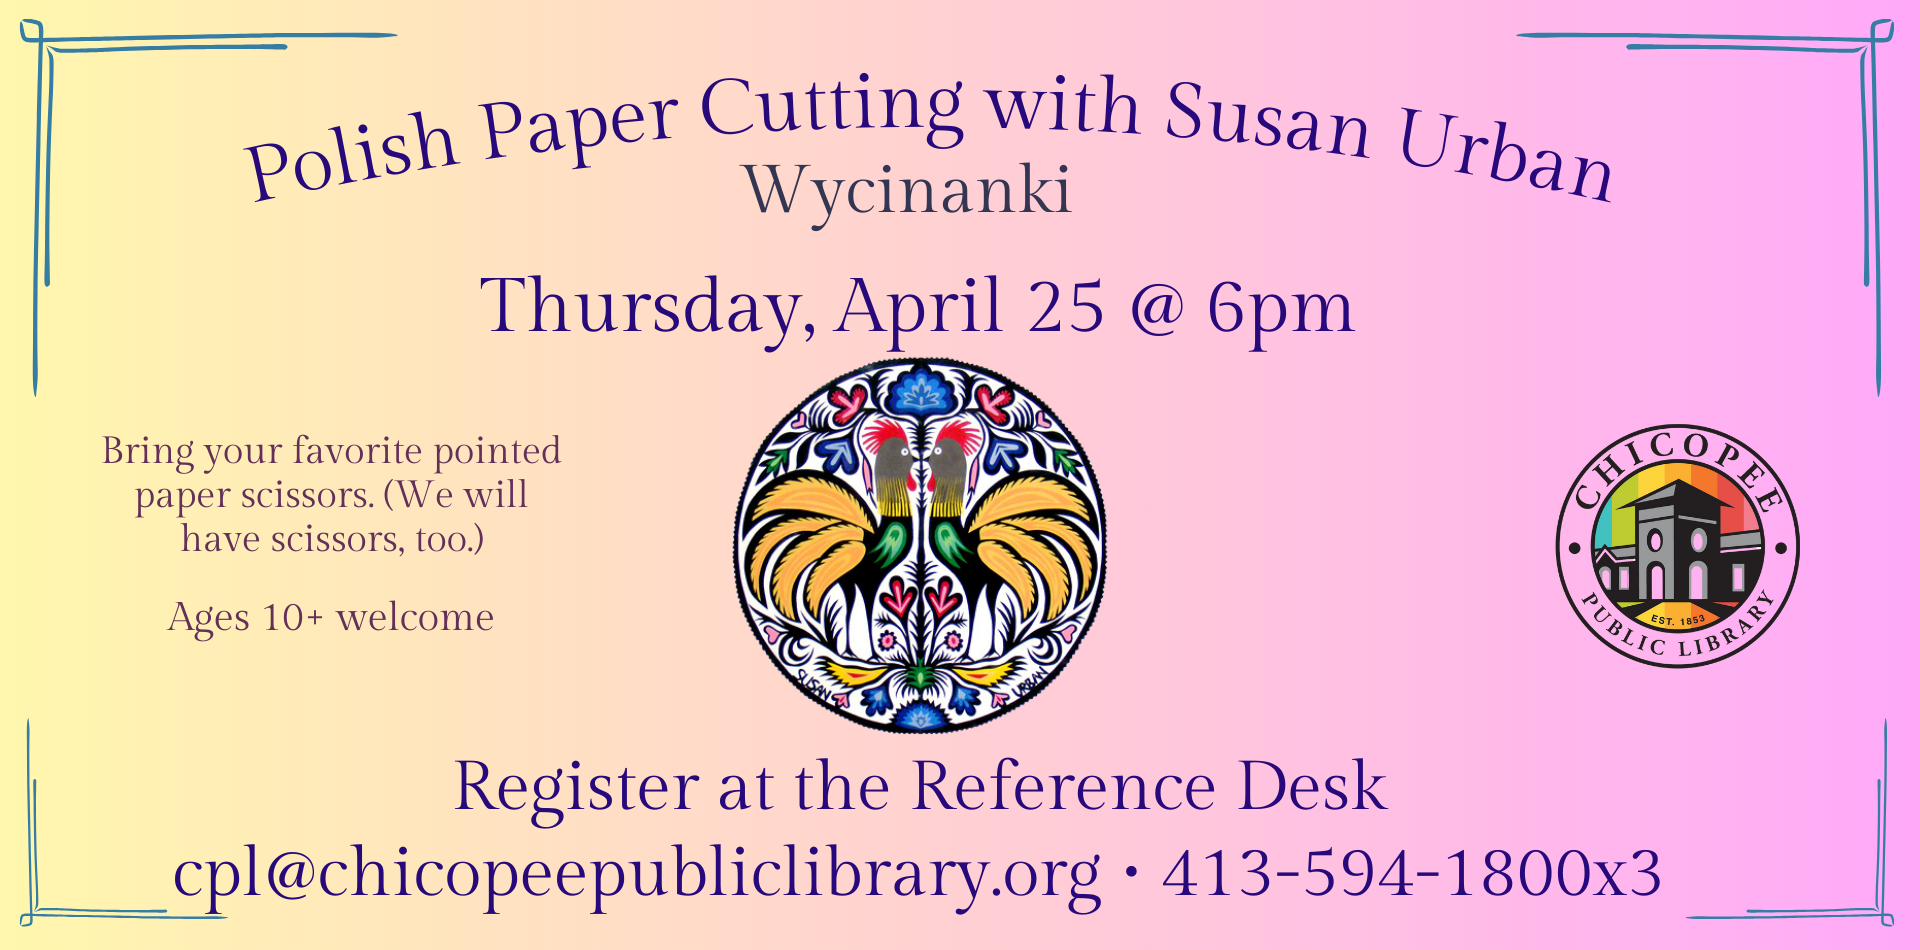 Learn about the art of Polish Paper Cutting with Susan Urban. Register at the Reference Desk 413-594-1800x3. April 25 at 6pm.